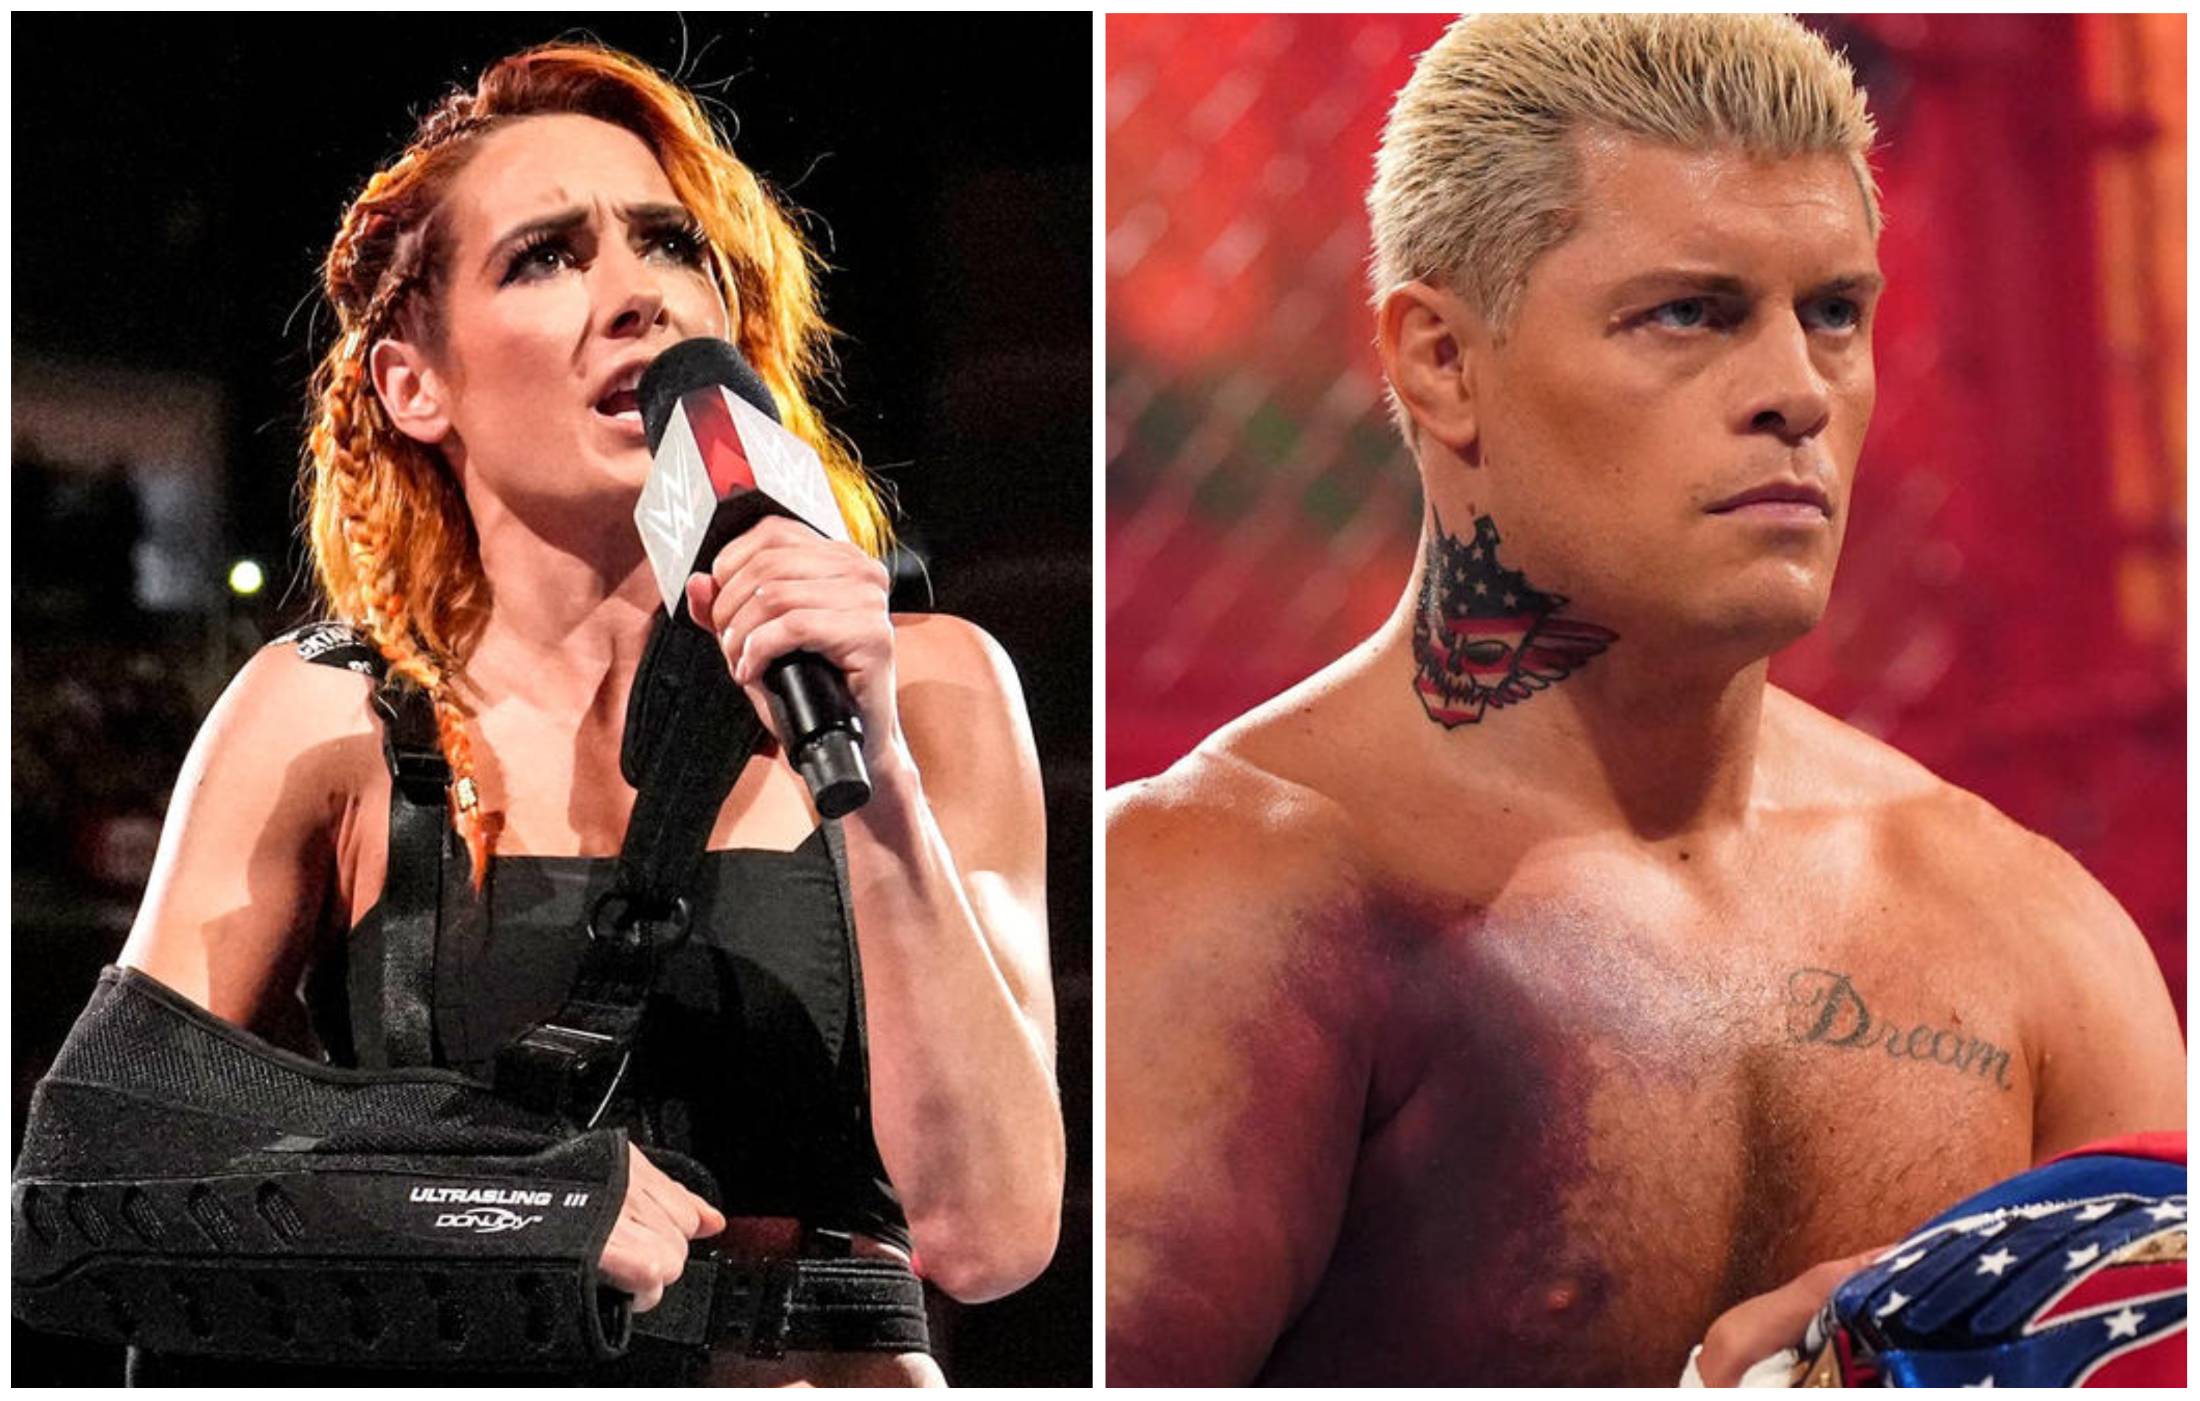 Cody Rhodes and Becky Lynch are returning to WWE in 2023